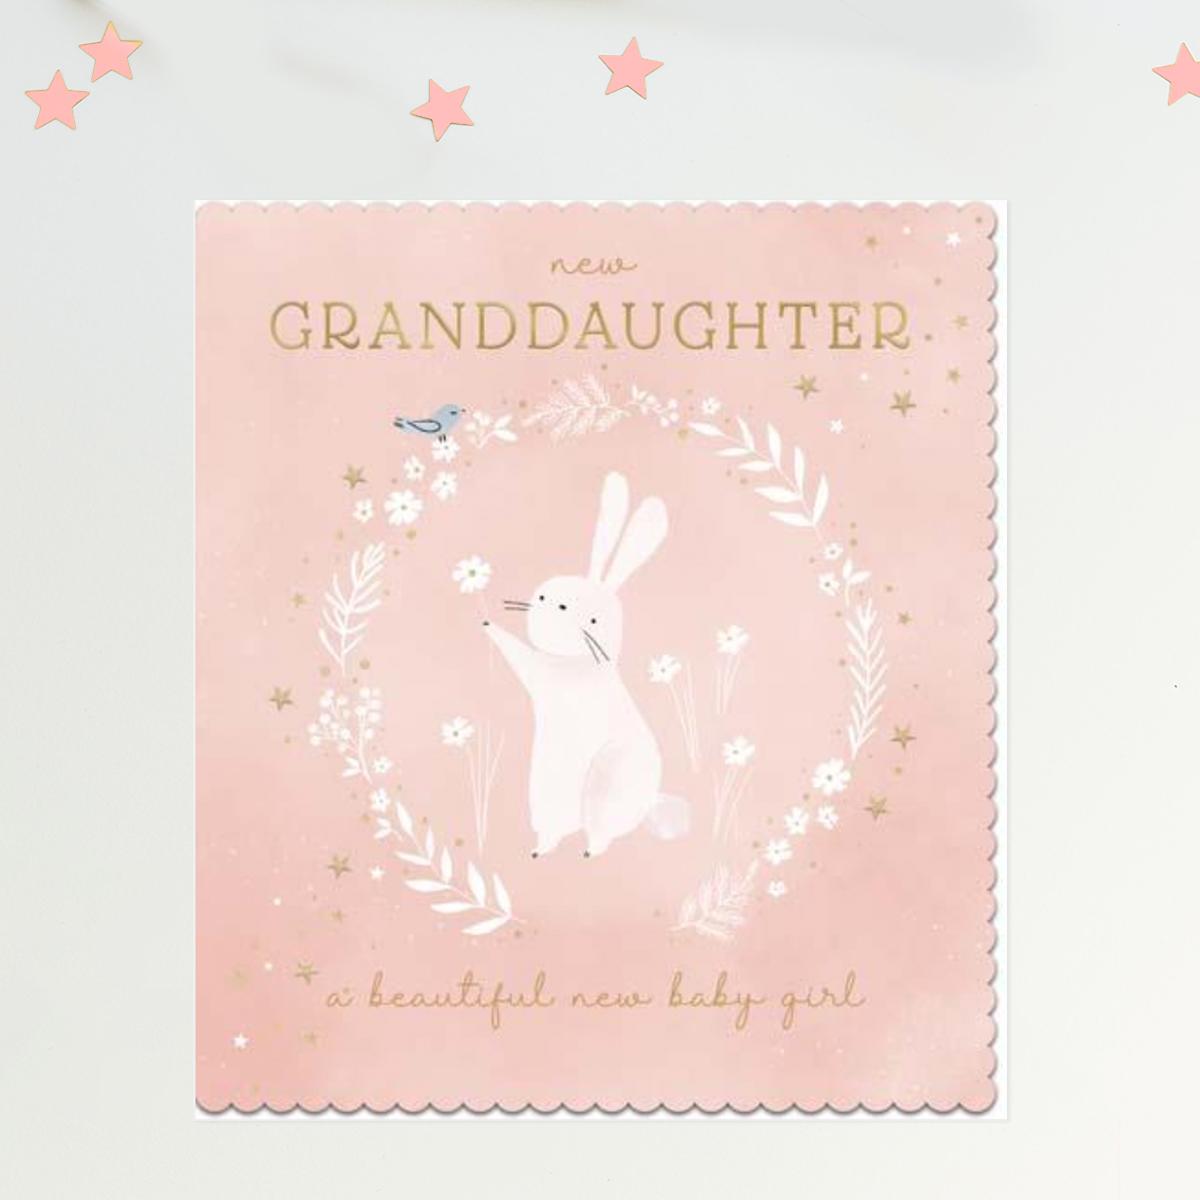 New Granddaughter Card Front Image